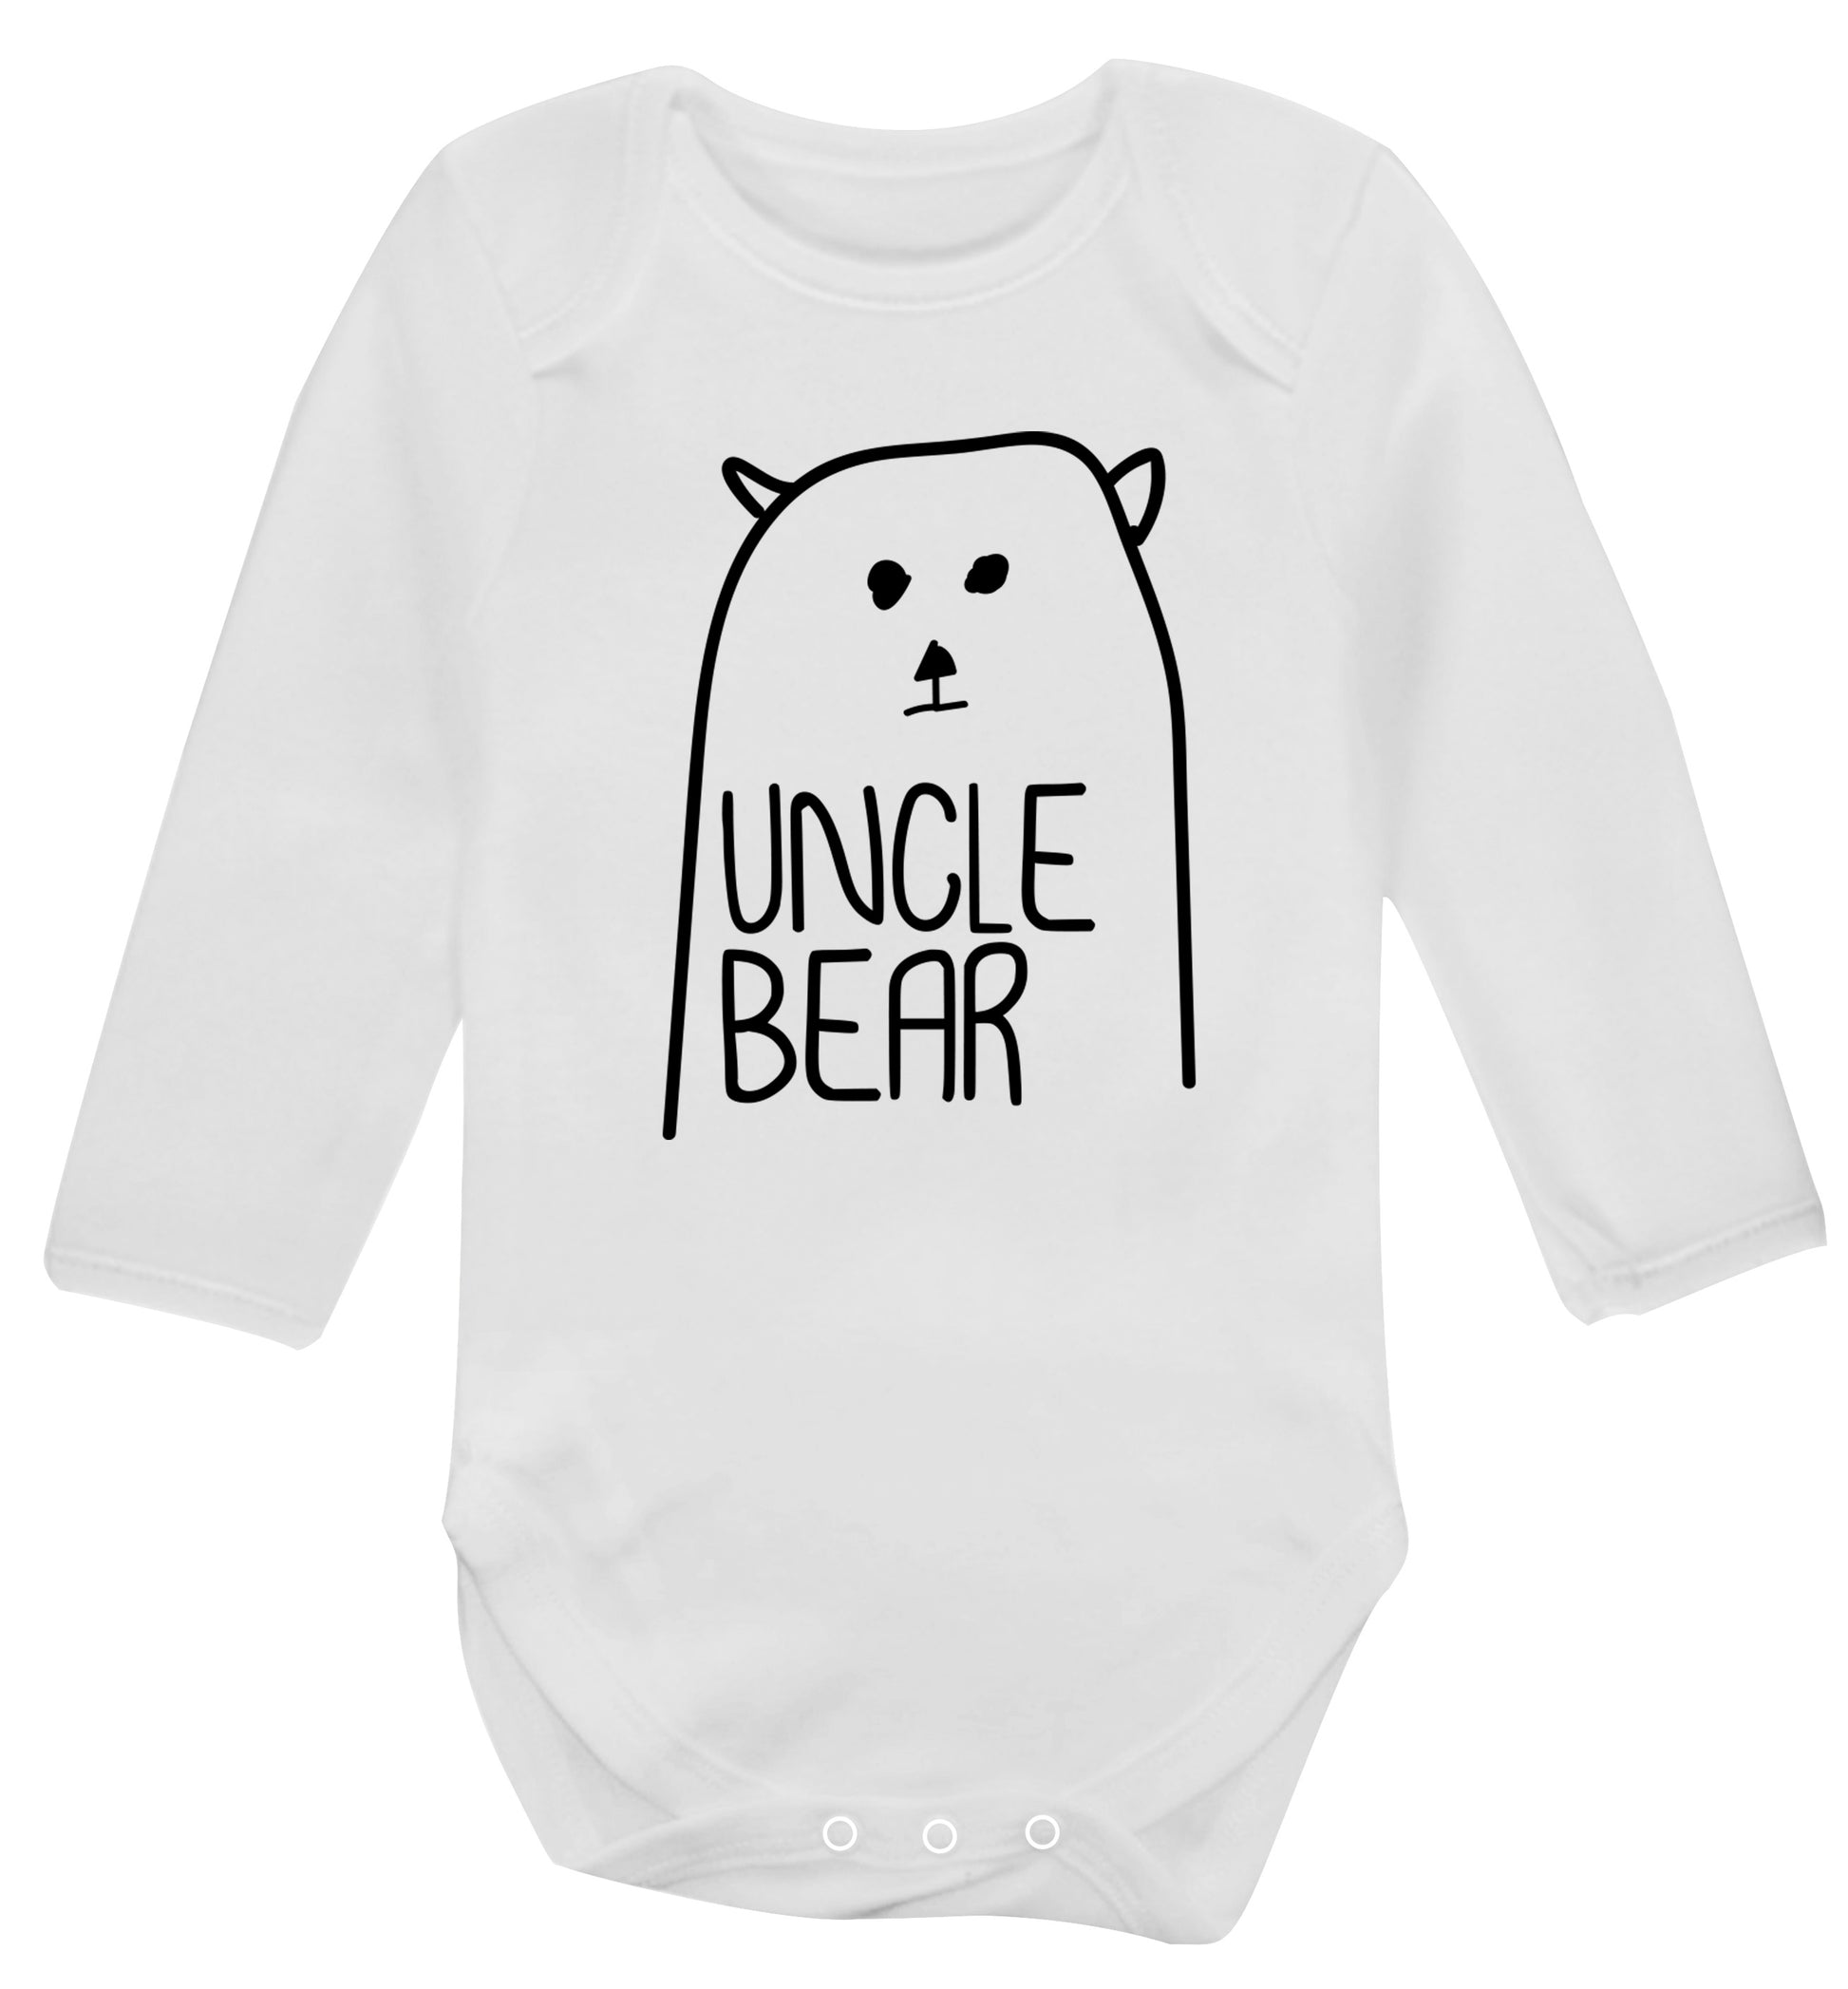 Uncle bear Baby Vest long sleeved white 6-12 months